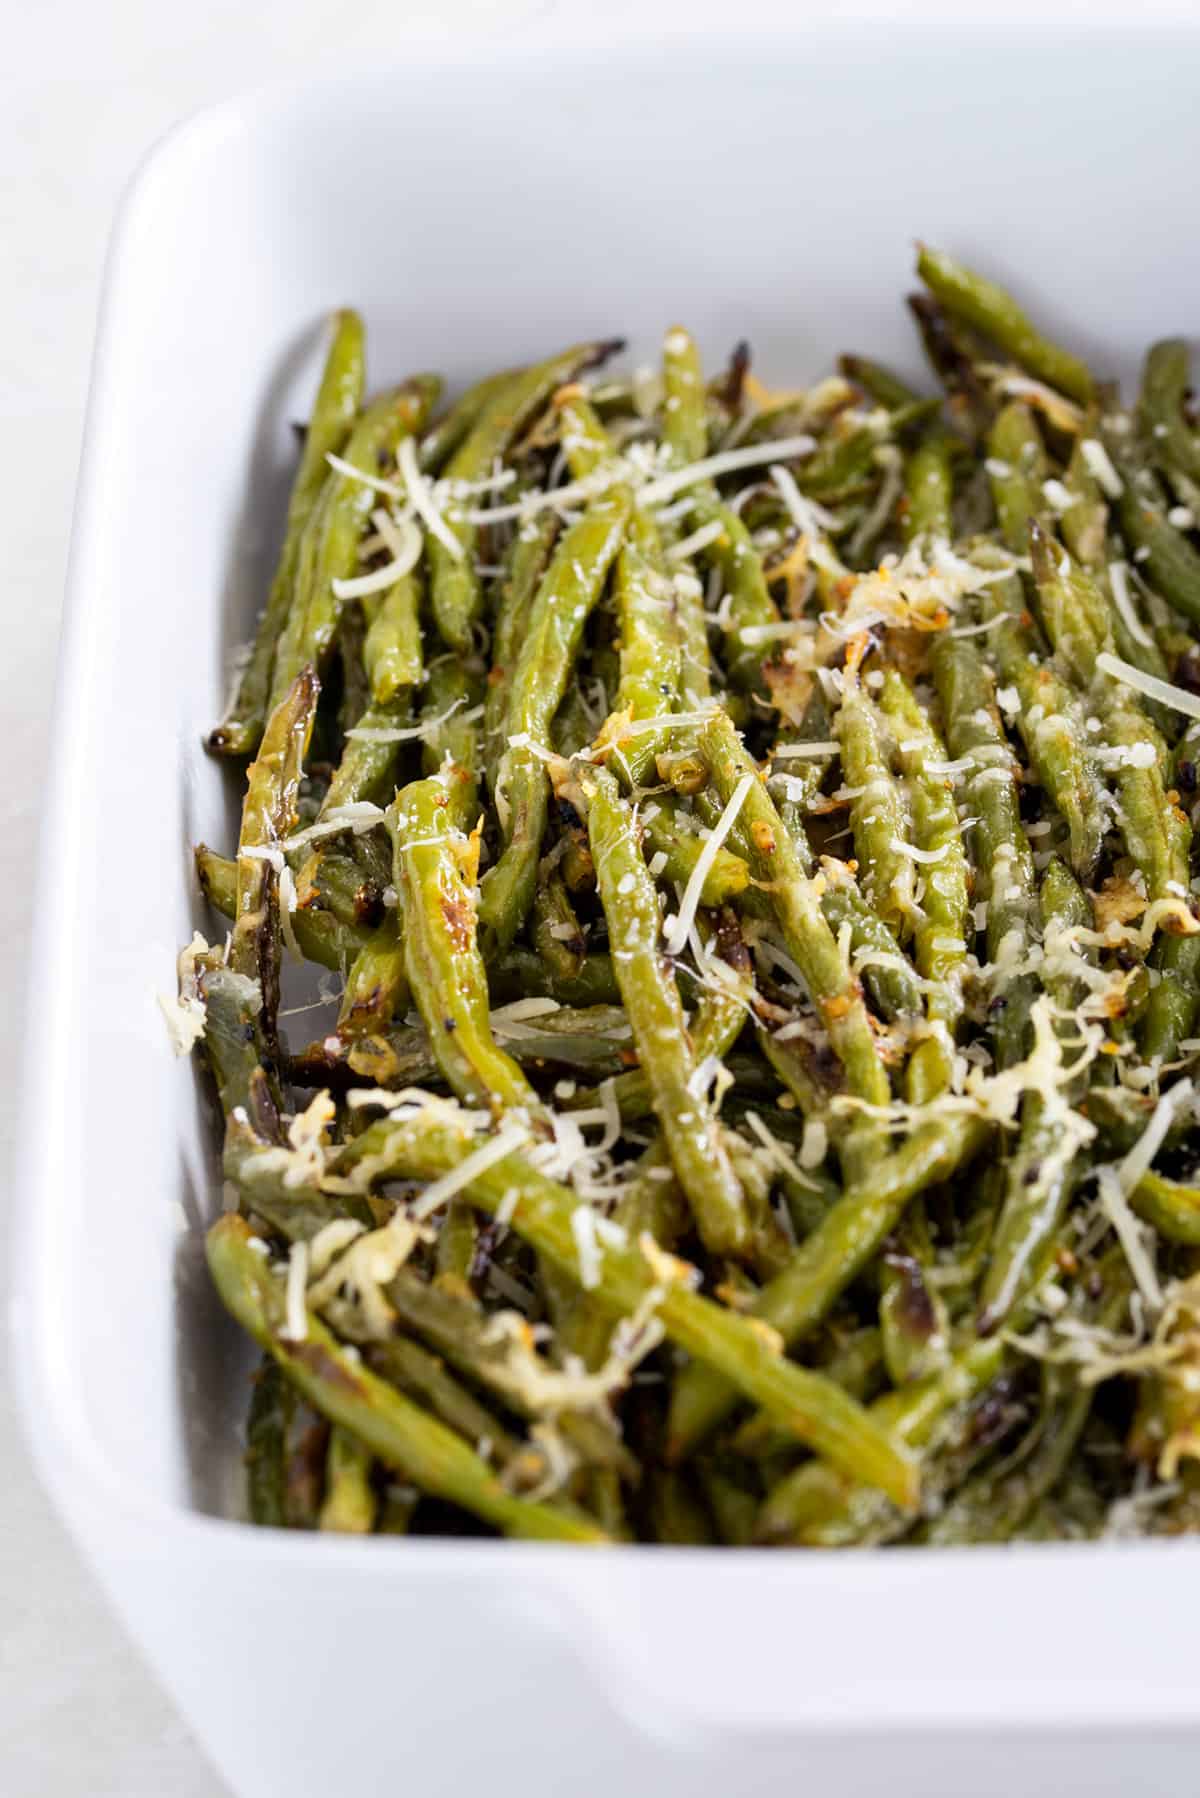 Oven roasted green beans sprinkled with parmesan and garlic in a casserole dish.